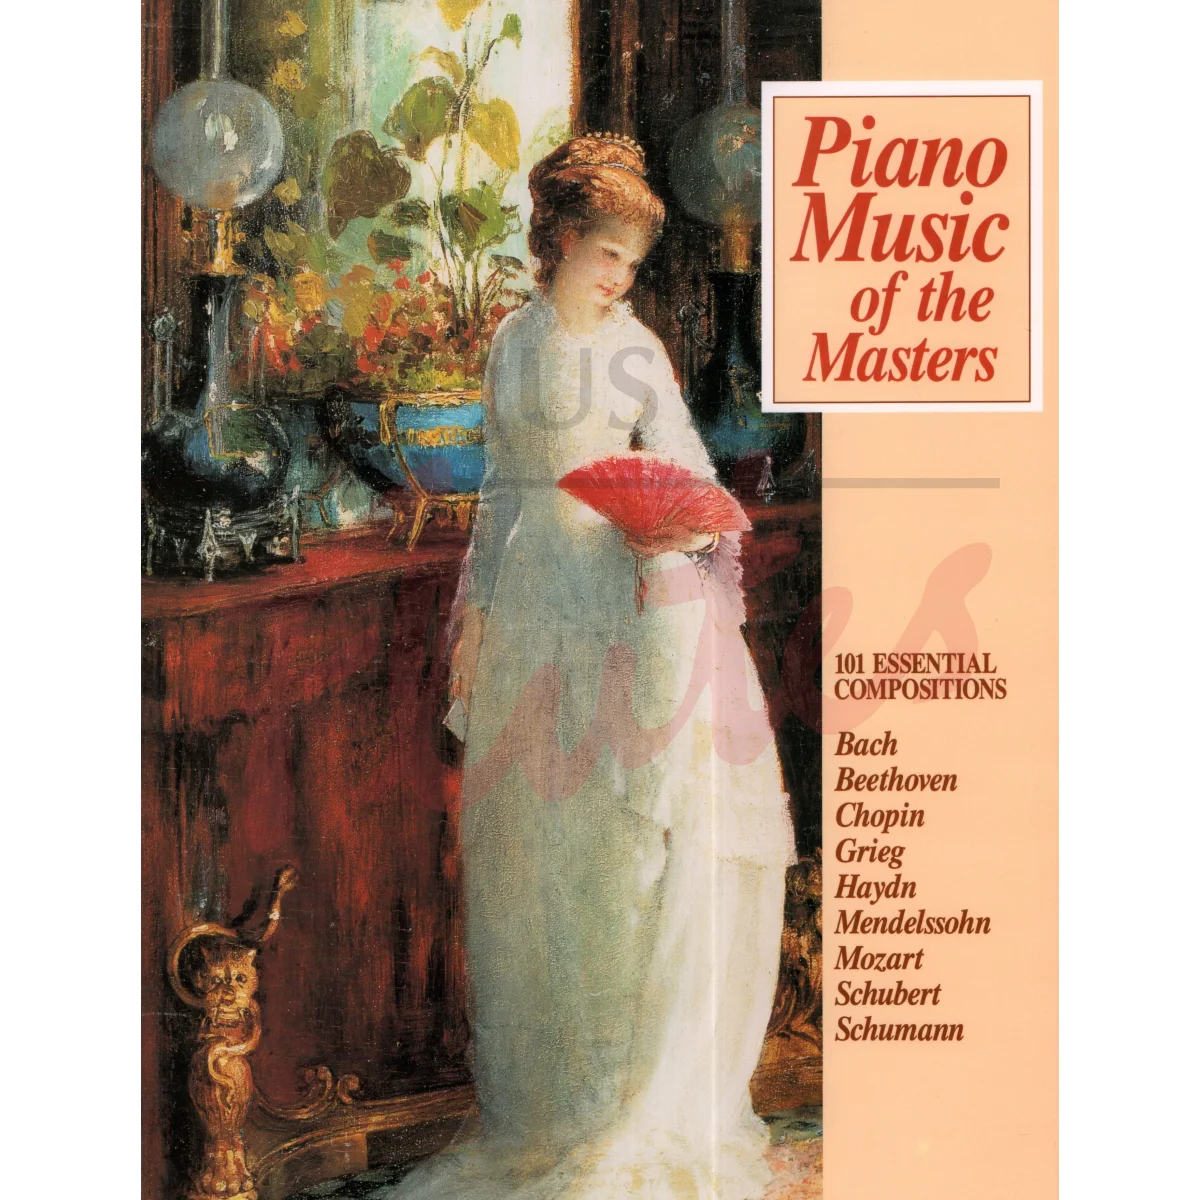 Piano Music of the Masters